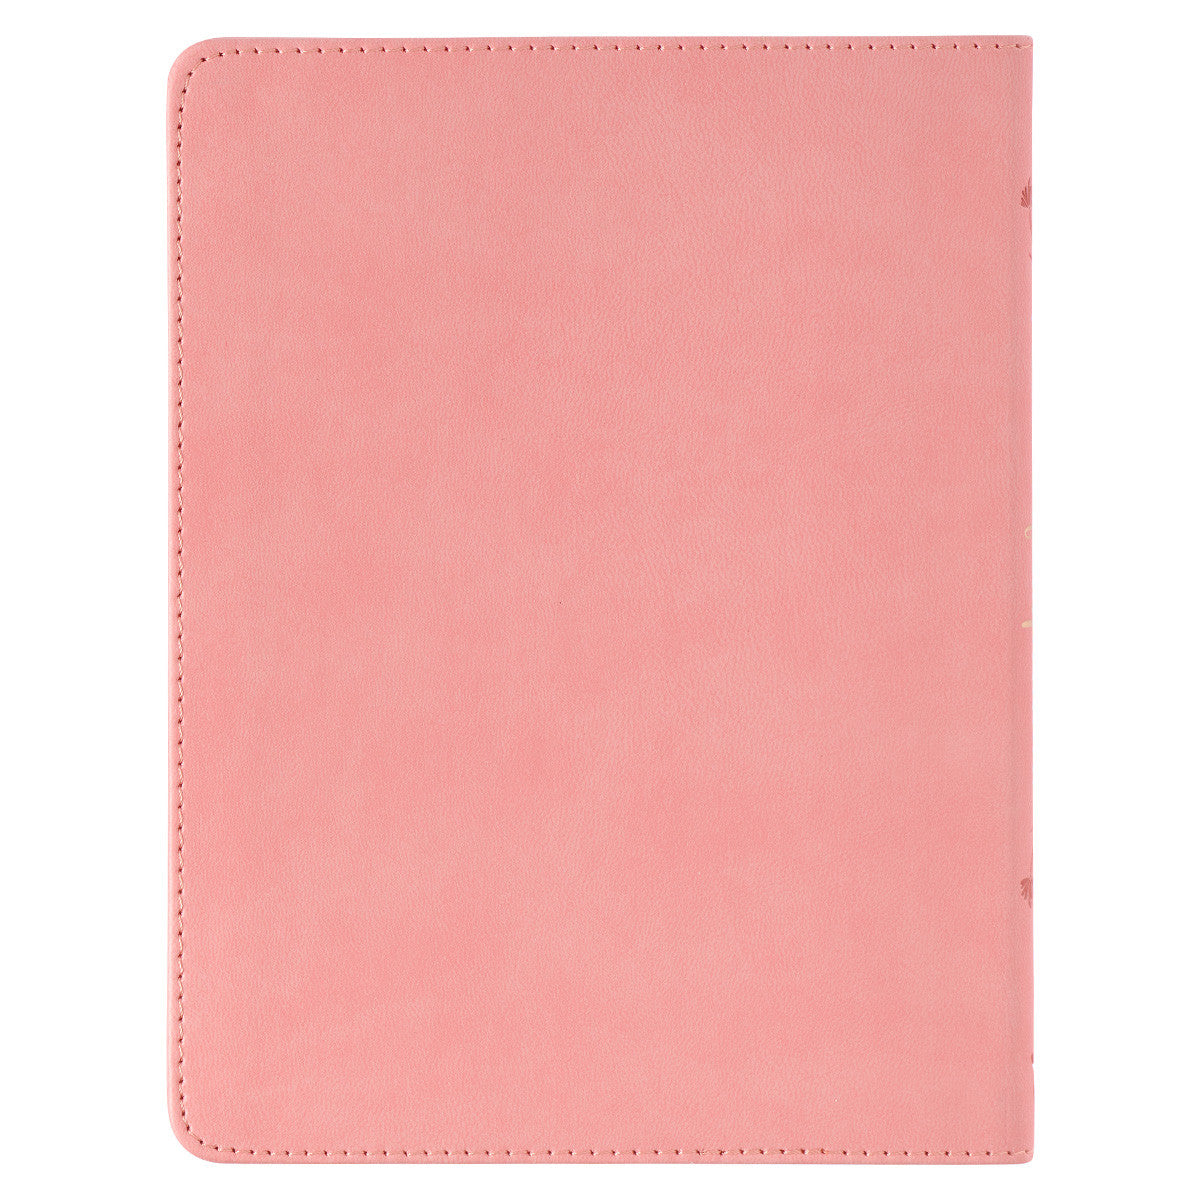 Moments of Inspiration Pink Faux Leather Gift Book